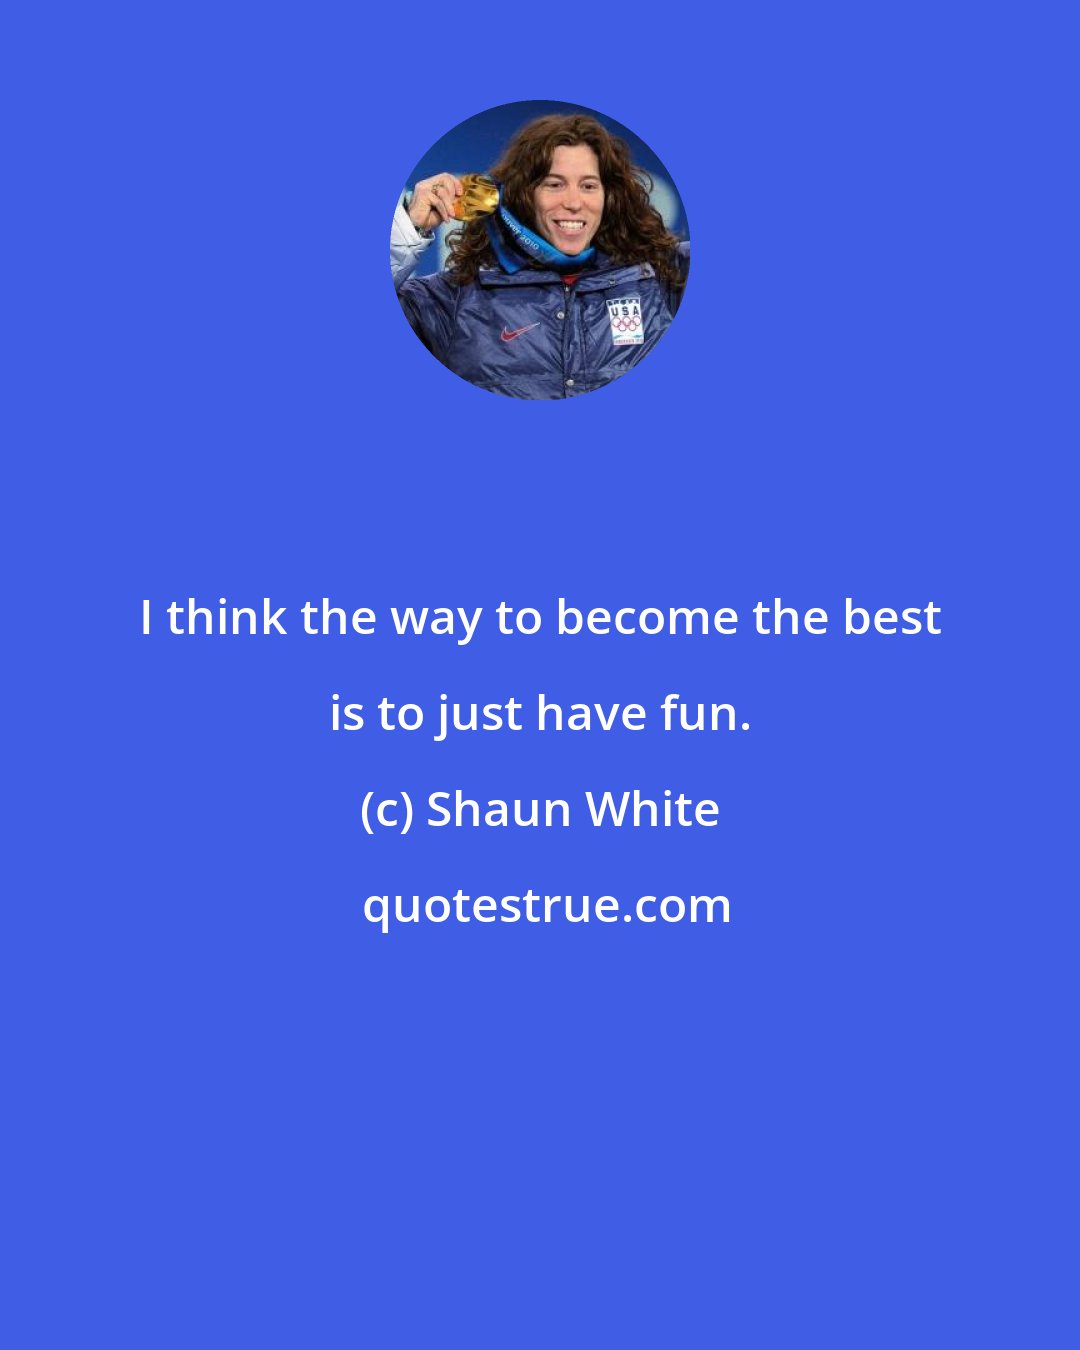 Shaun White: I think the way to become the best is to just have fun.